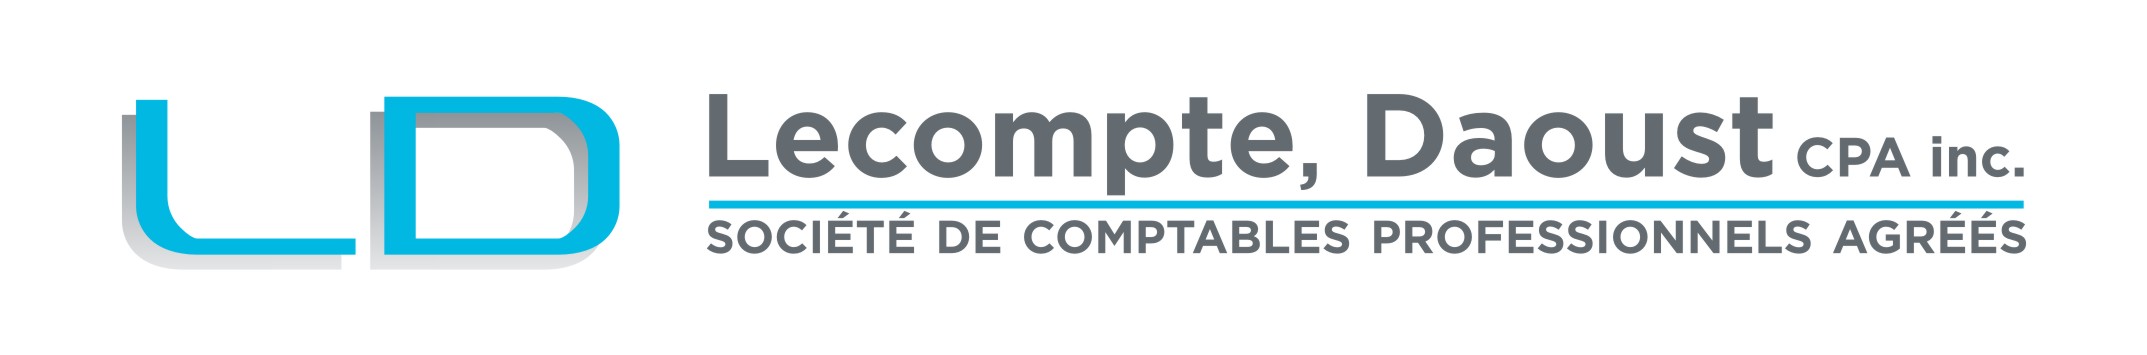 LECOMPTE DAOUST CPA INC.